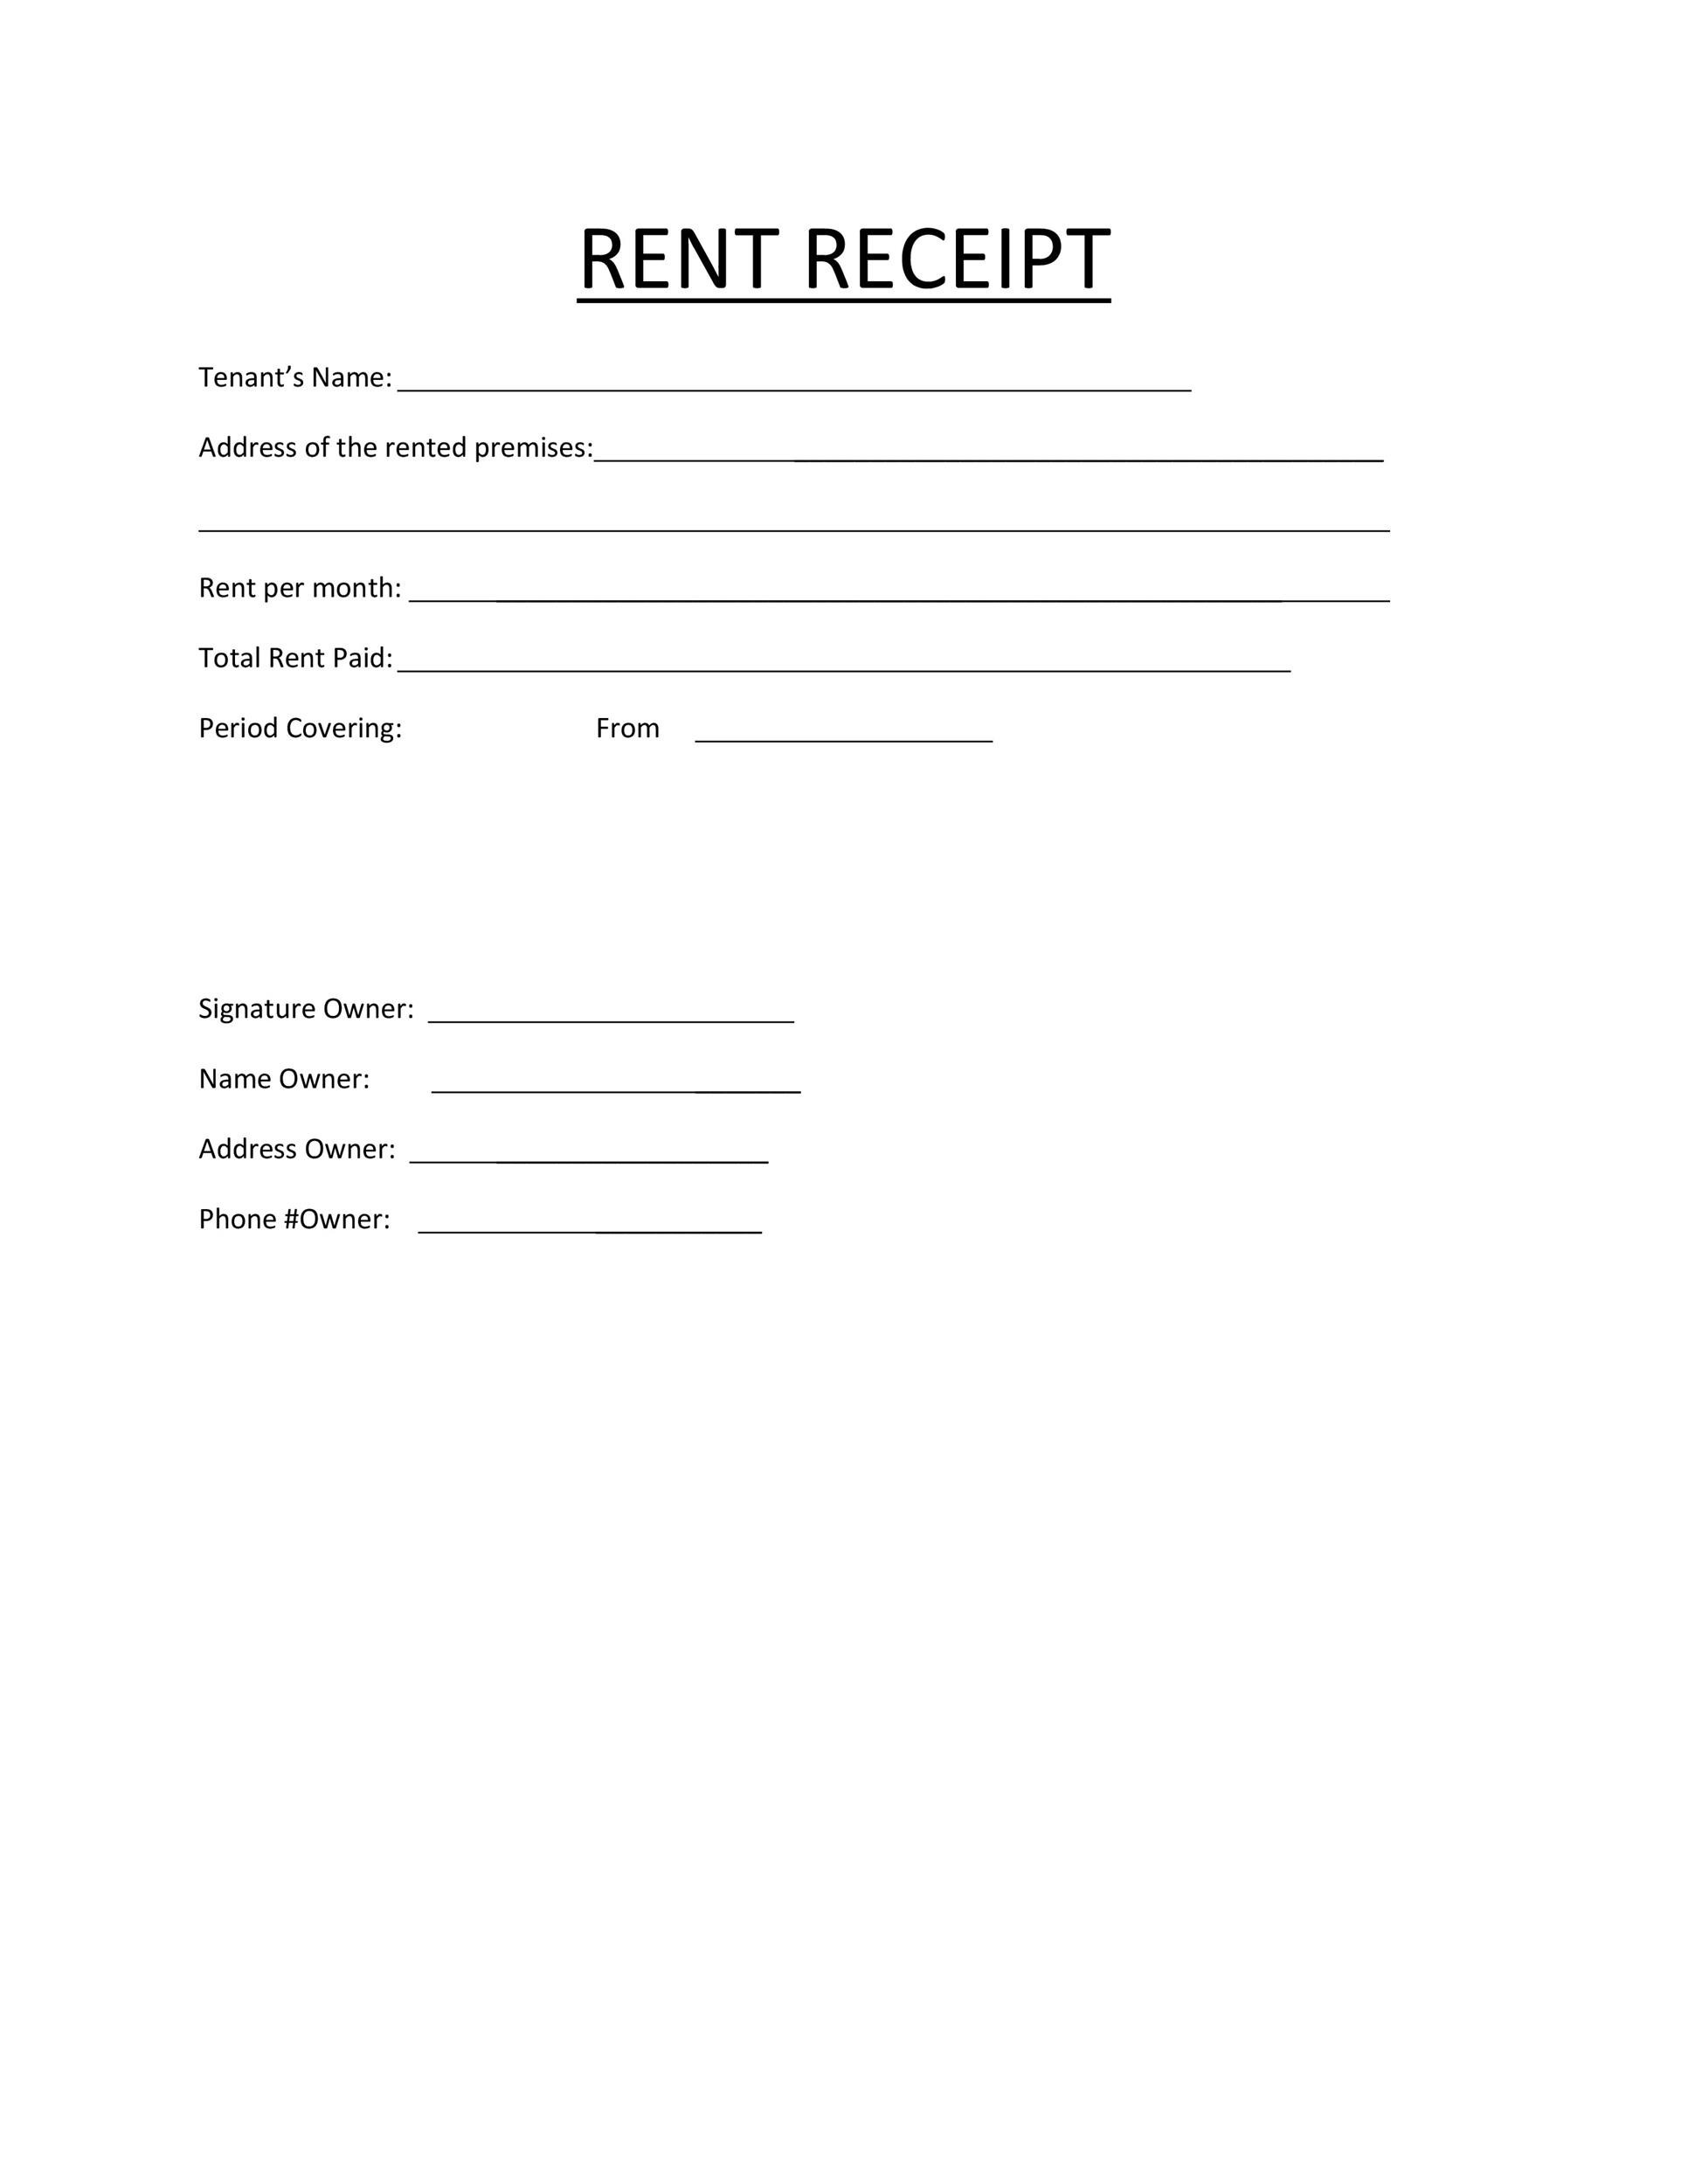 Rent Received Receipt Format TUTORE ORG Master Of Documents